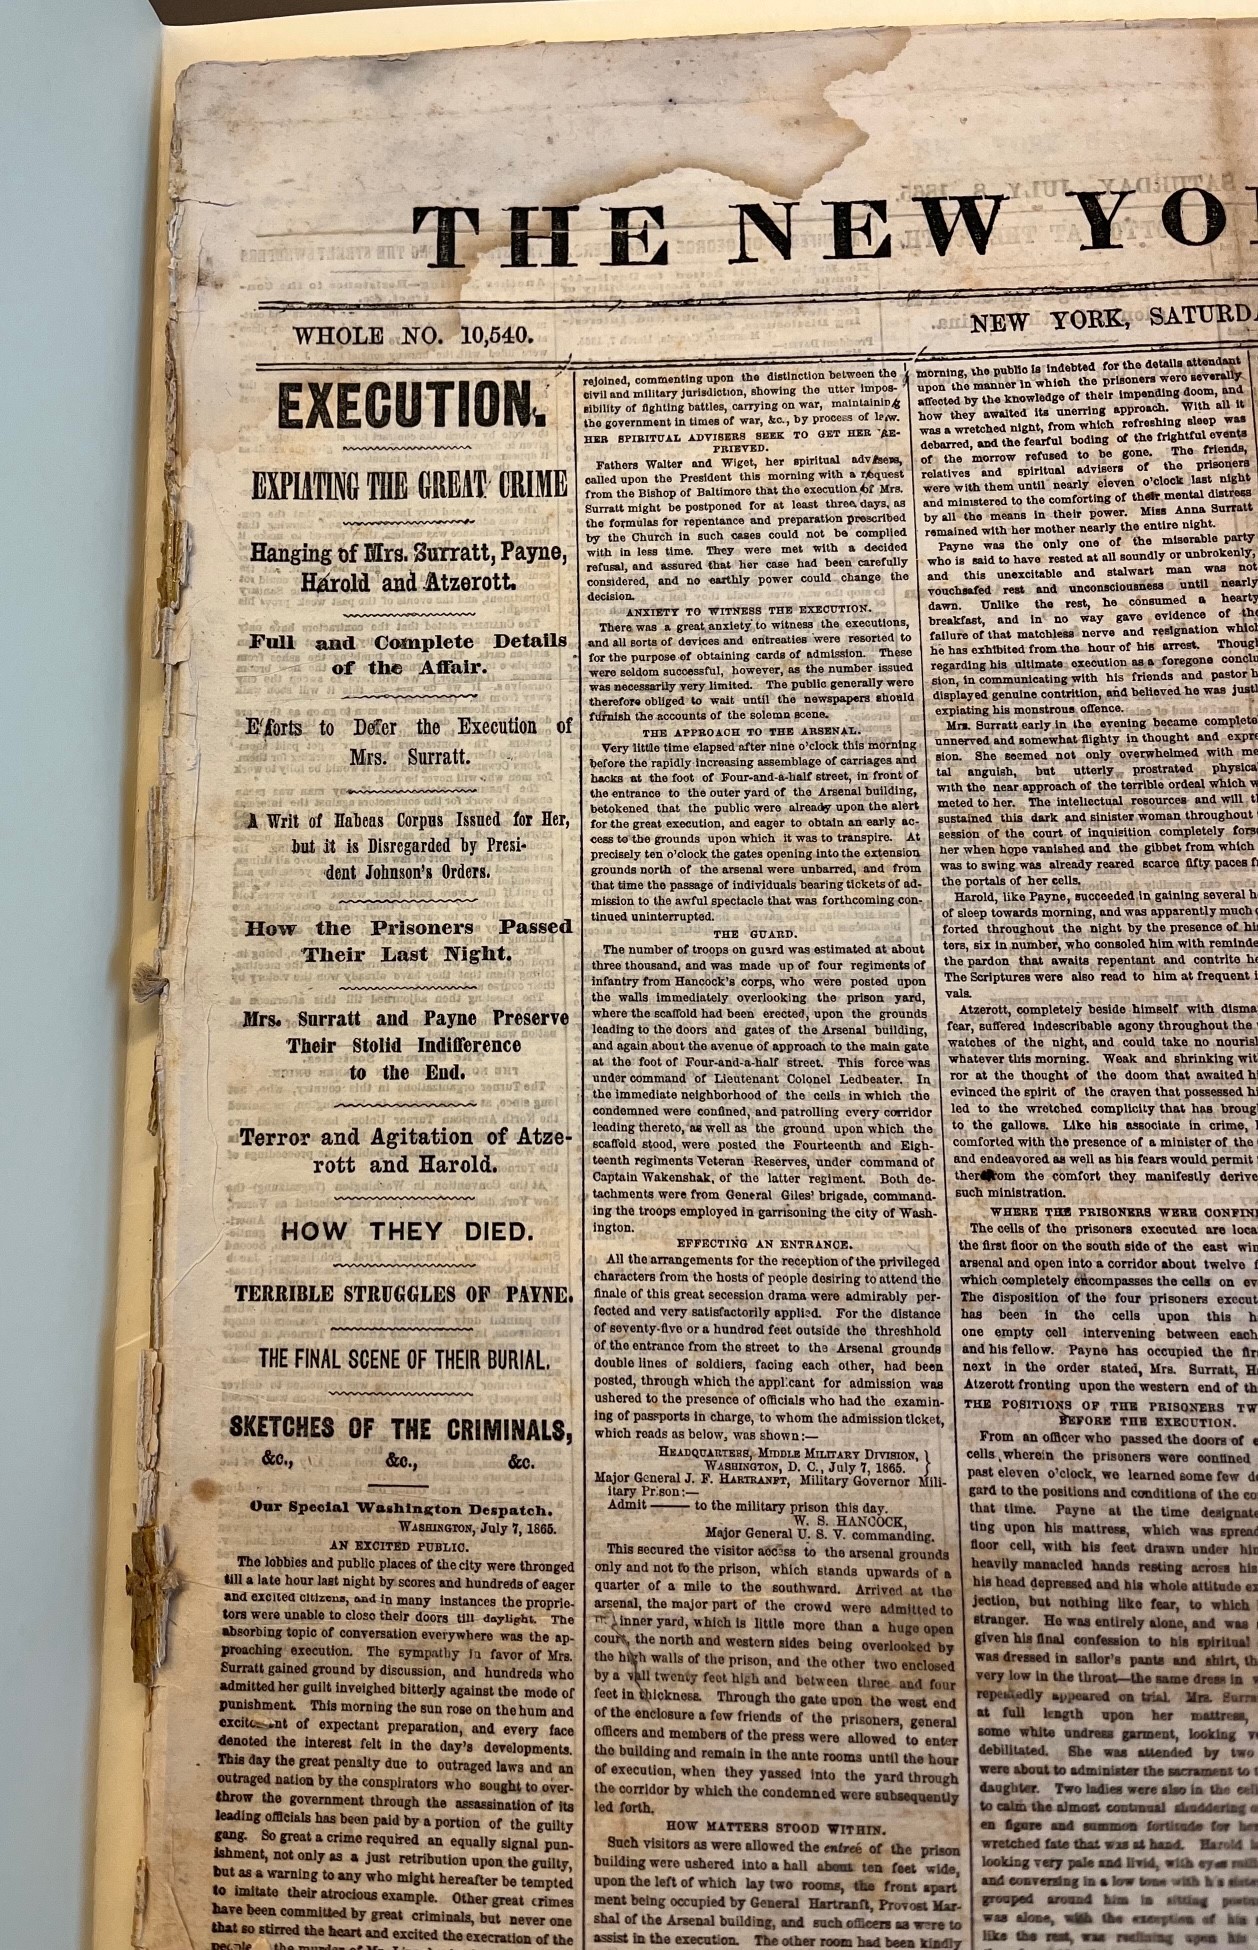 Front page of the New York Herald showing headlines of the executions.